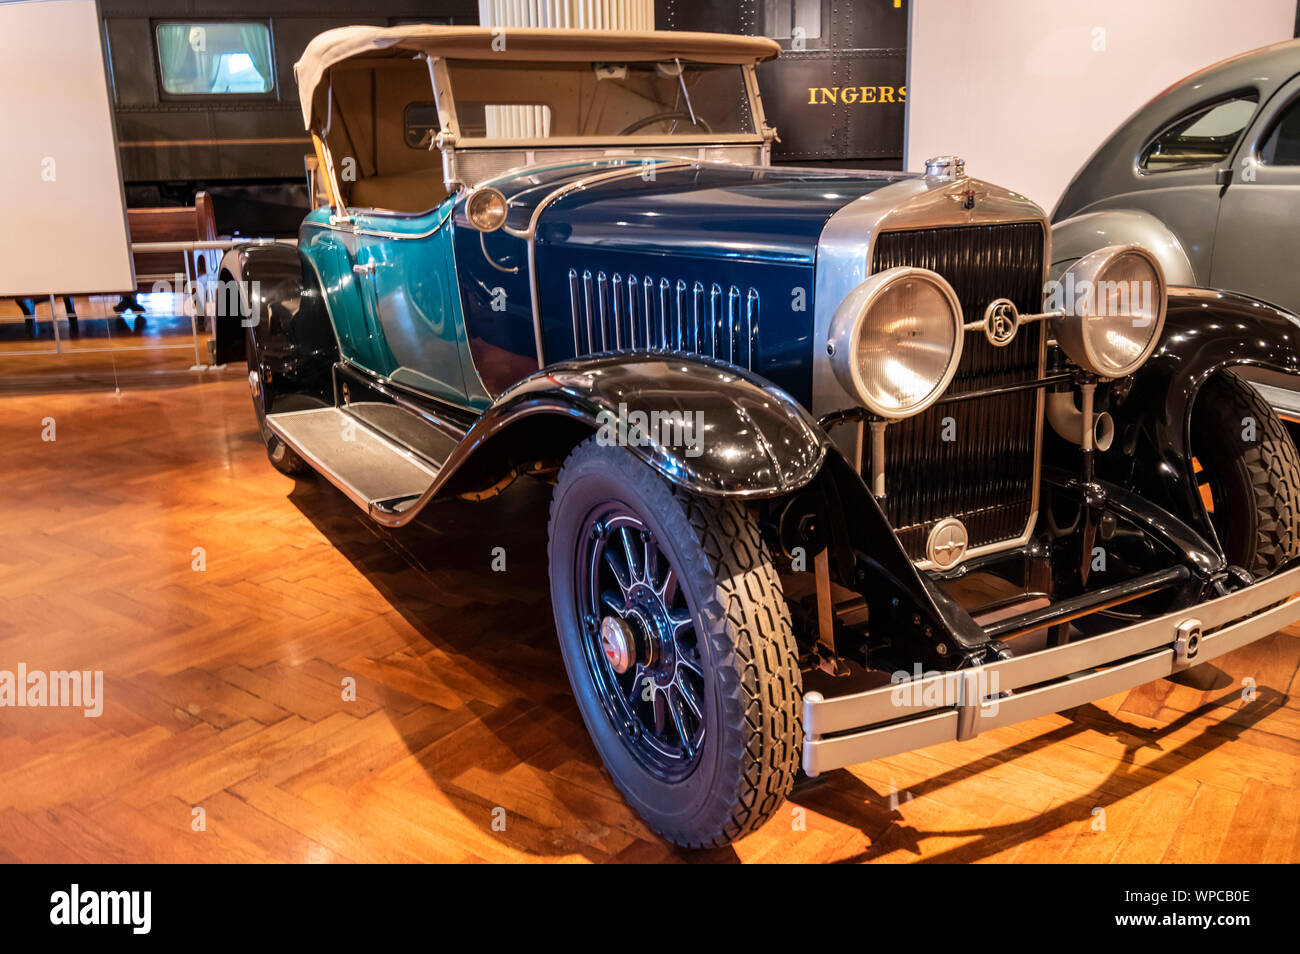 Dearborn, Mi, Usa - March 2019: The 1927 Cadillac LaSalle roadster presented in the Henry Ford Museum of American Innovation. Stock Photo